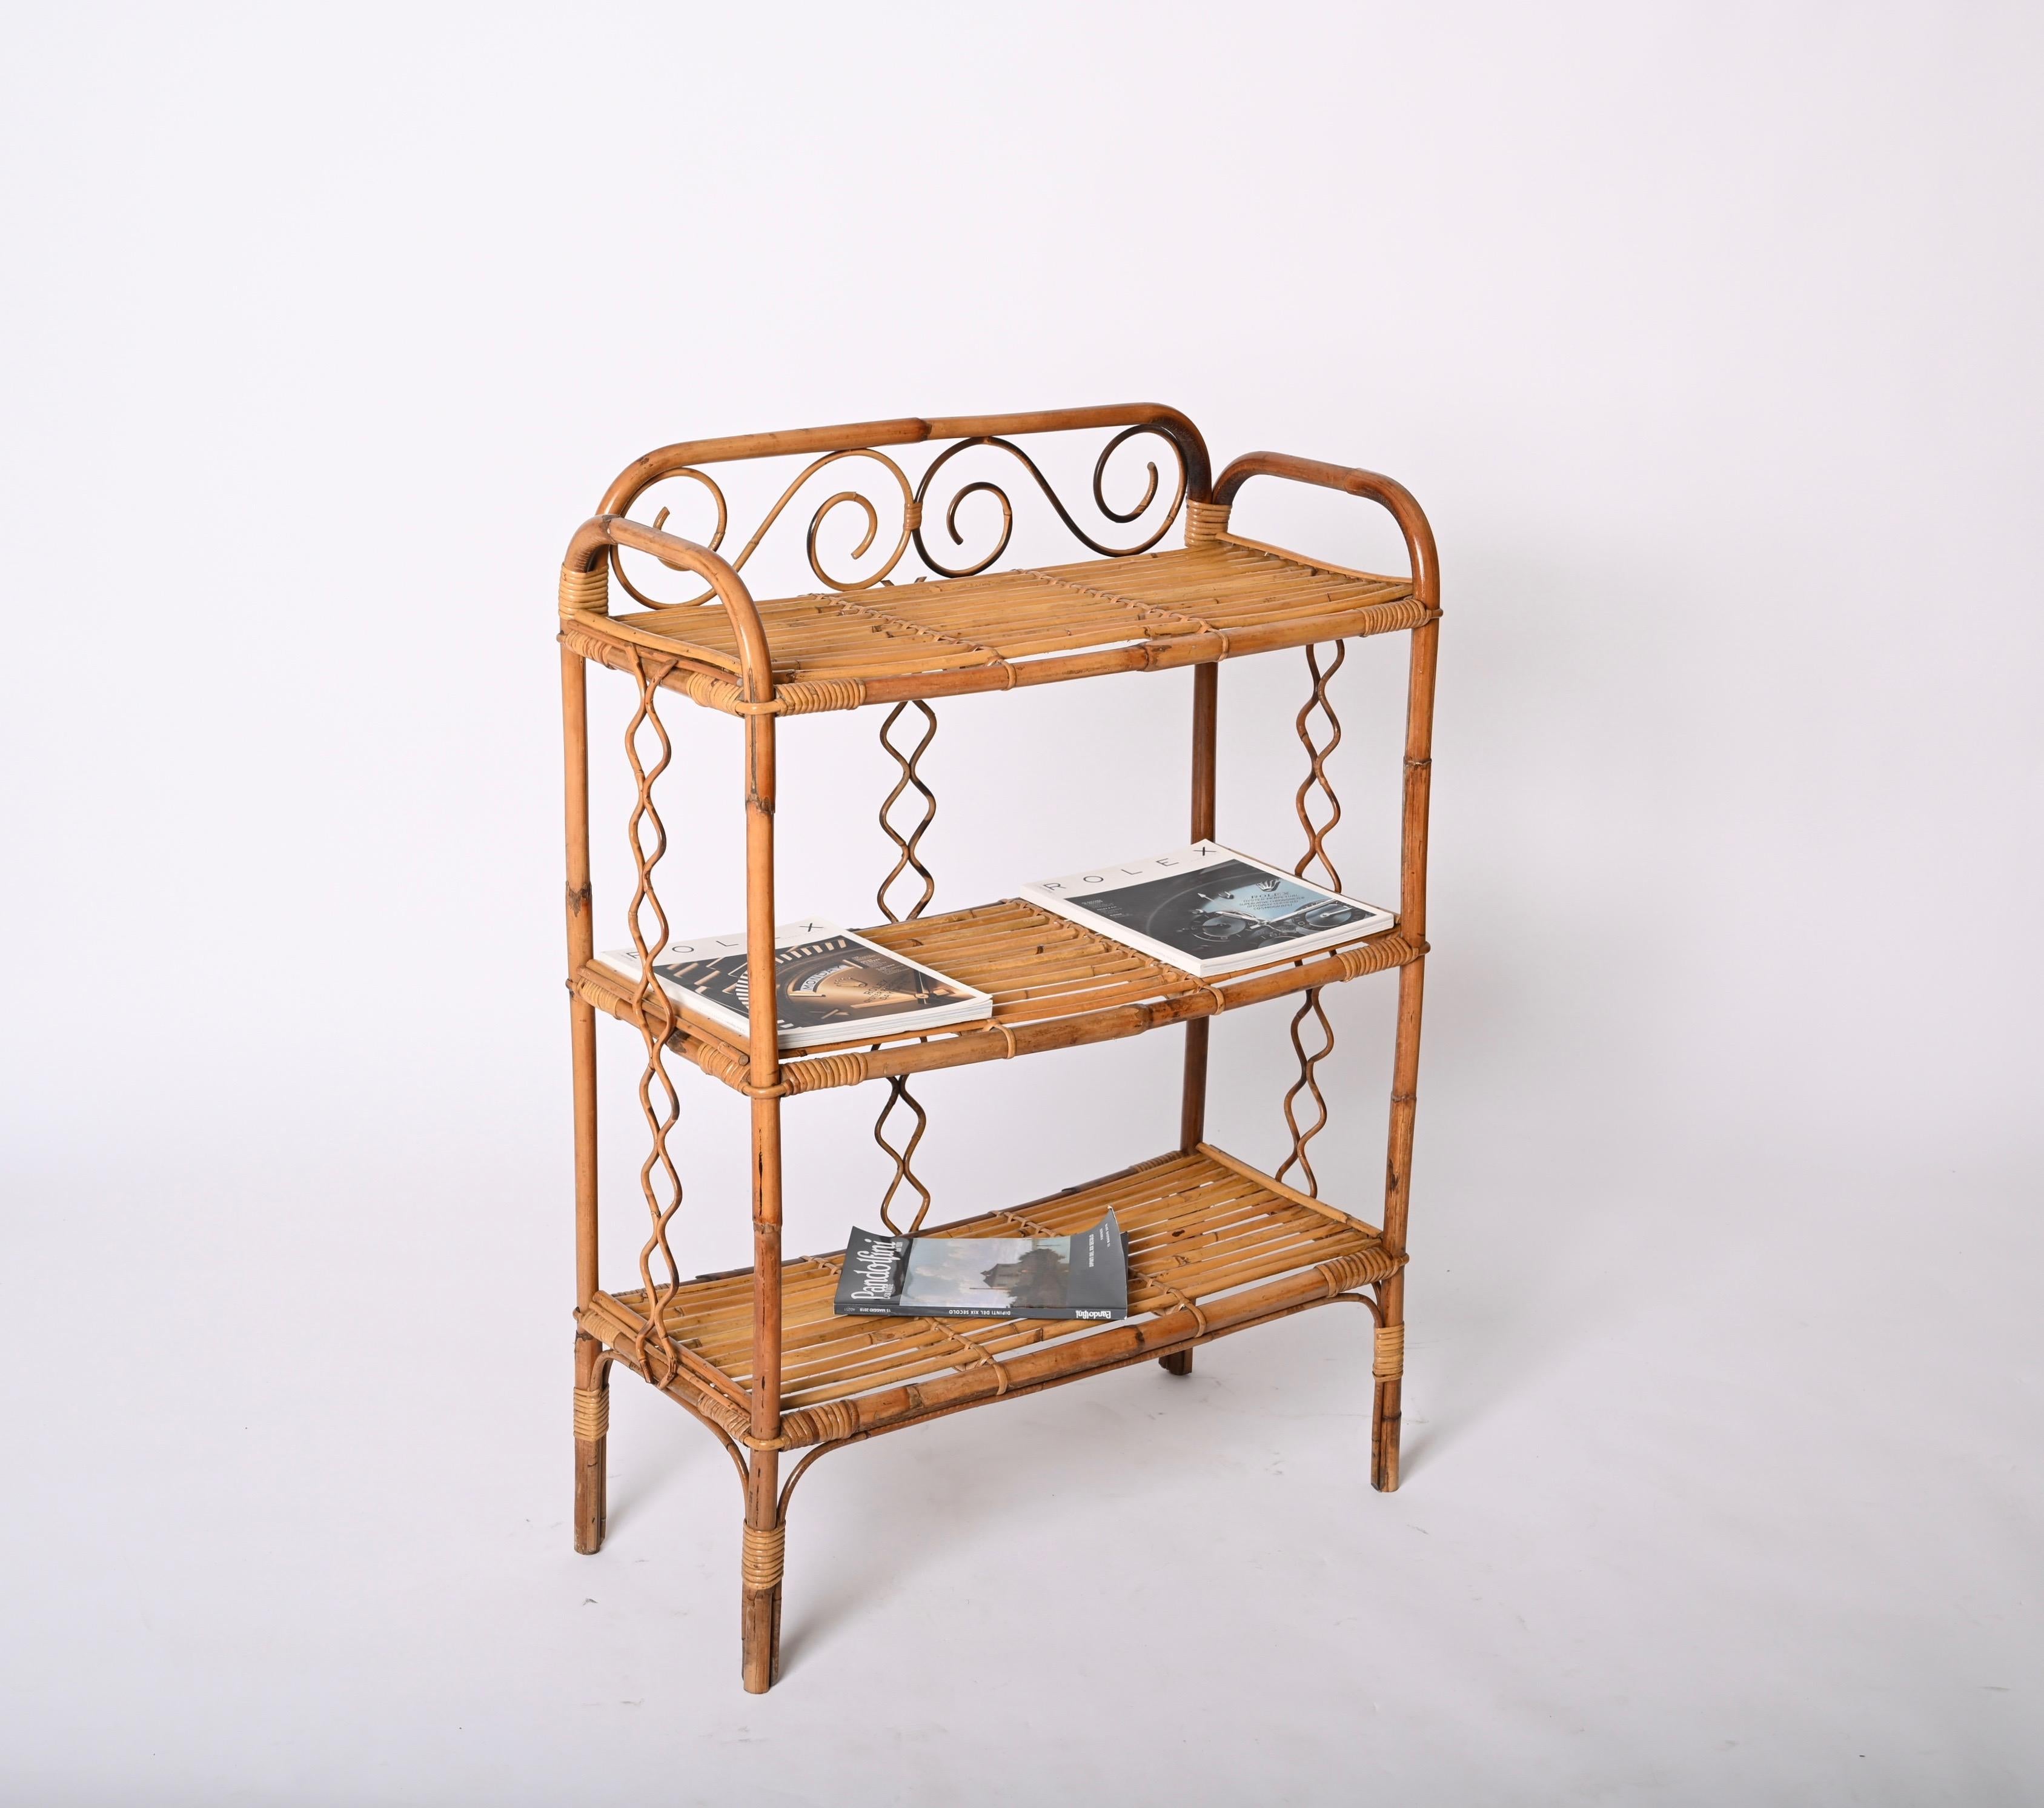 Midcentury Étagère Bamboo and Rattan, Italian Bookcase with Three Shelves, 1970s For Sale 9